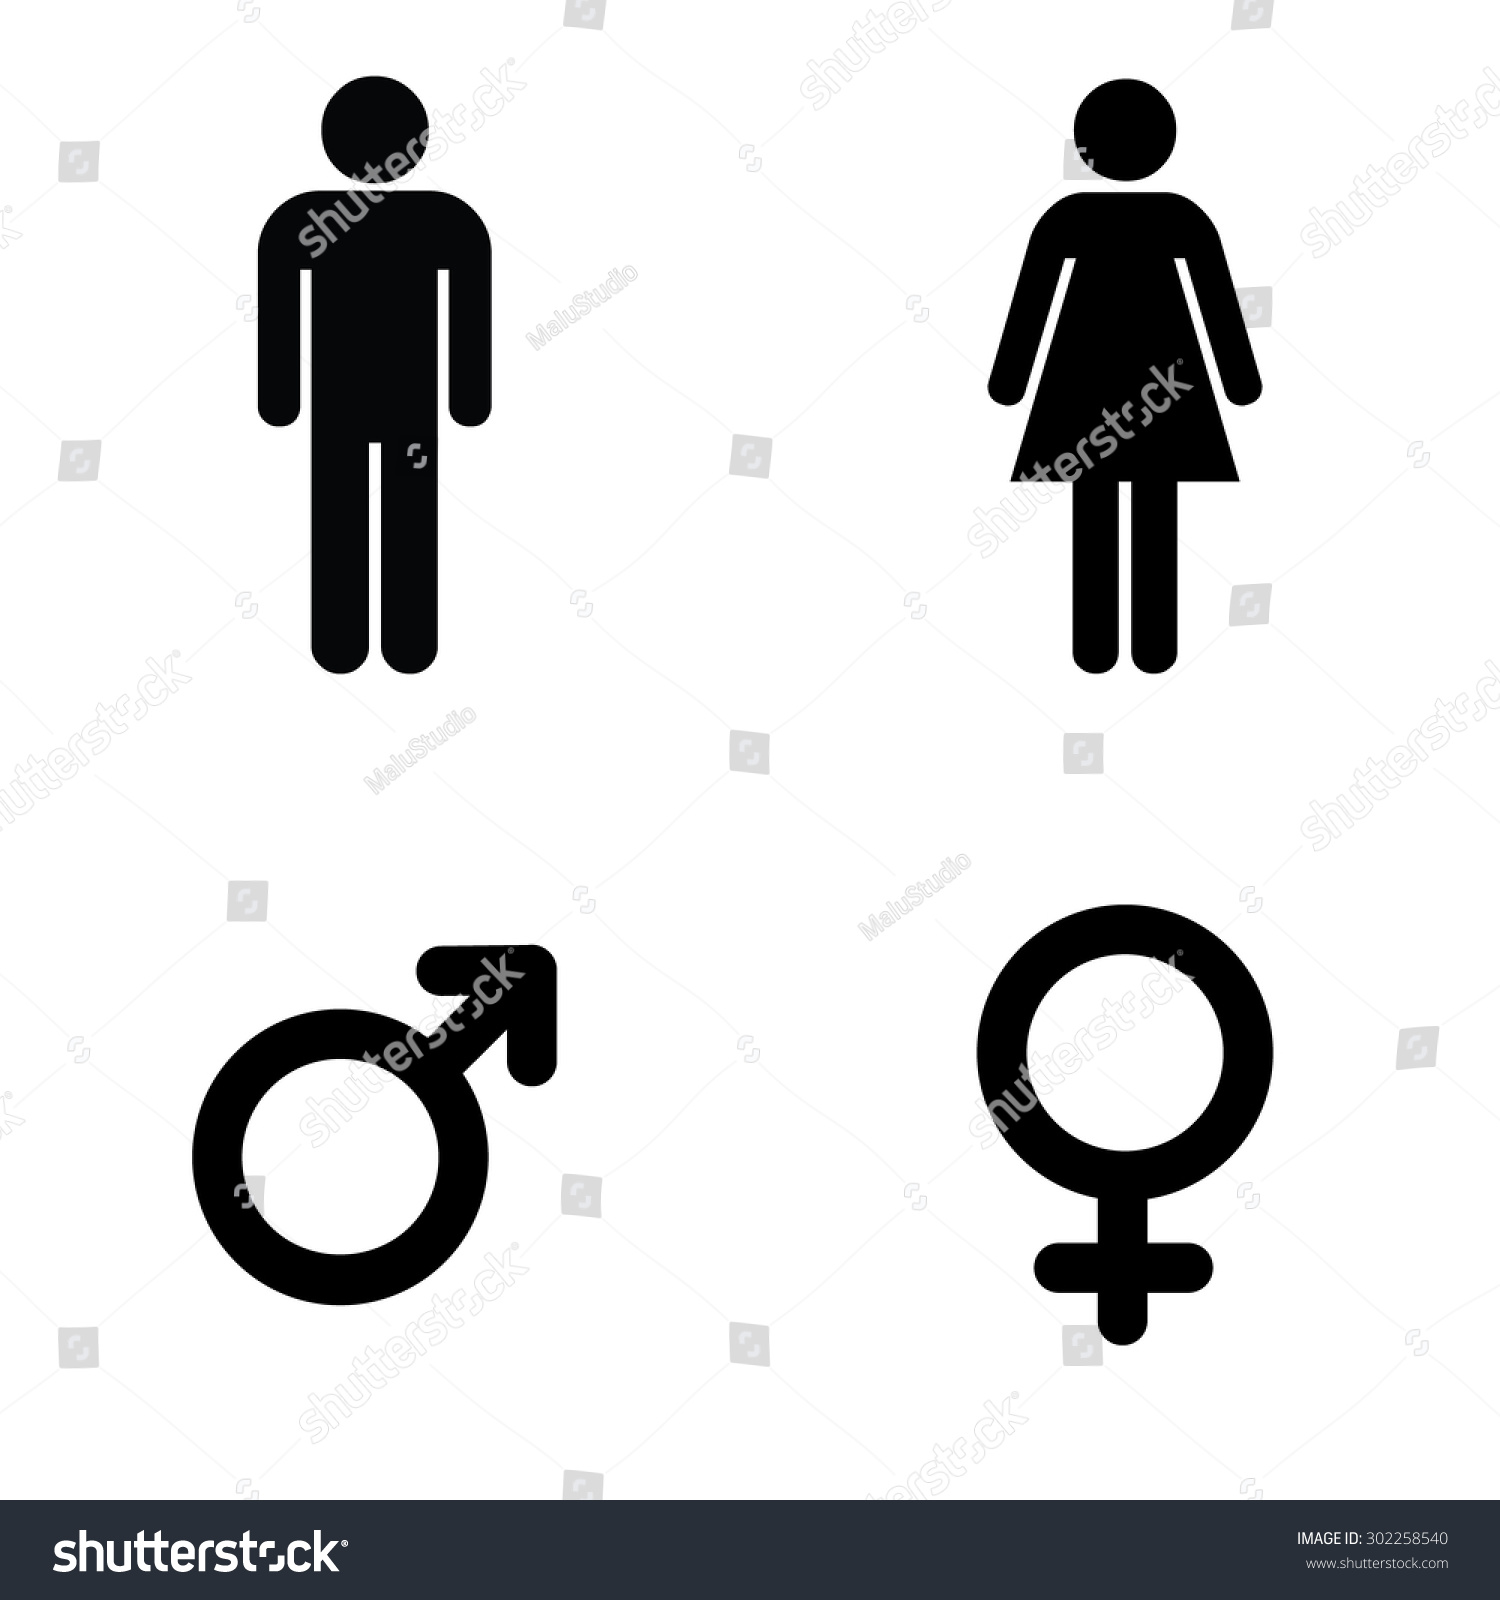 Man Lady Toilet Sign Male Female Stock Vector 302258540 ...
 Man And Woman Bathroom Symbol